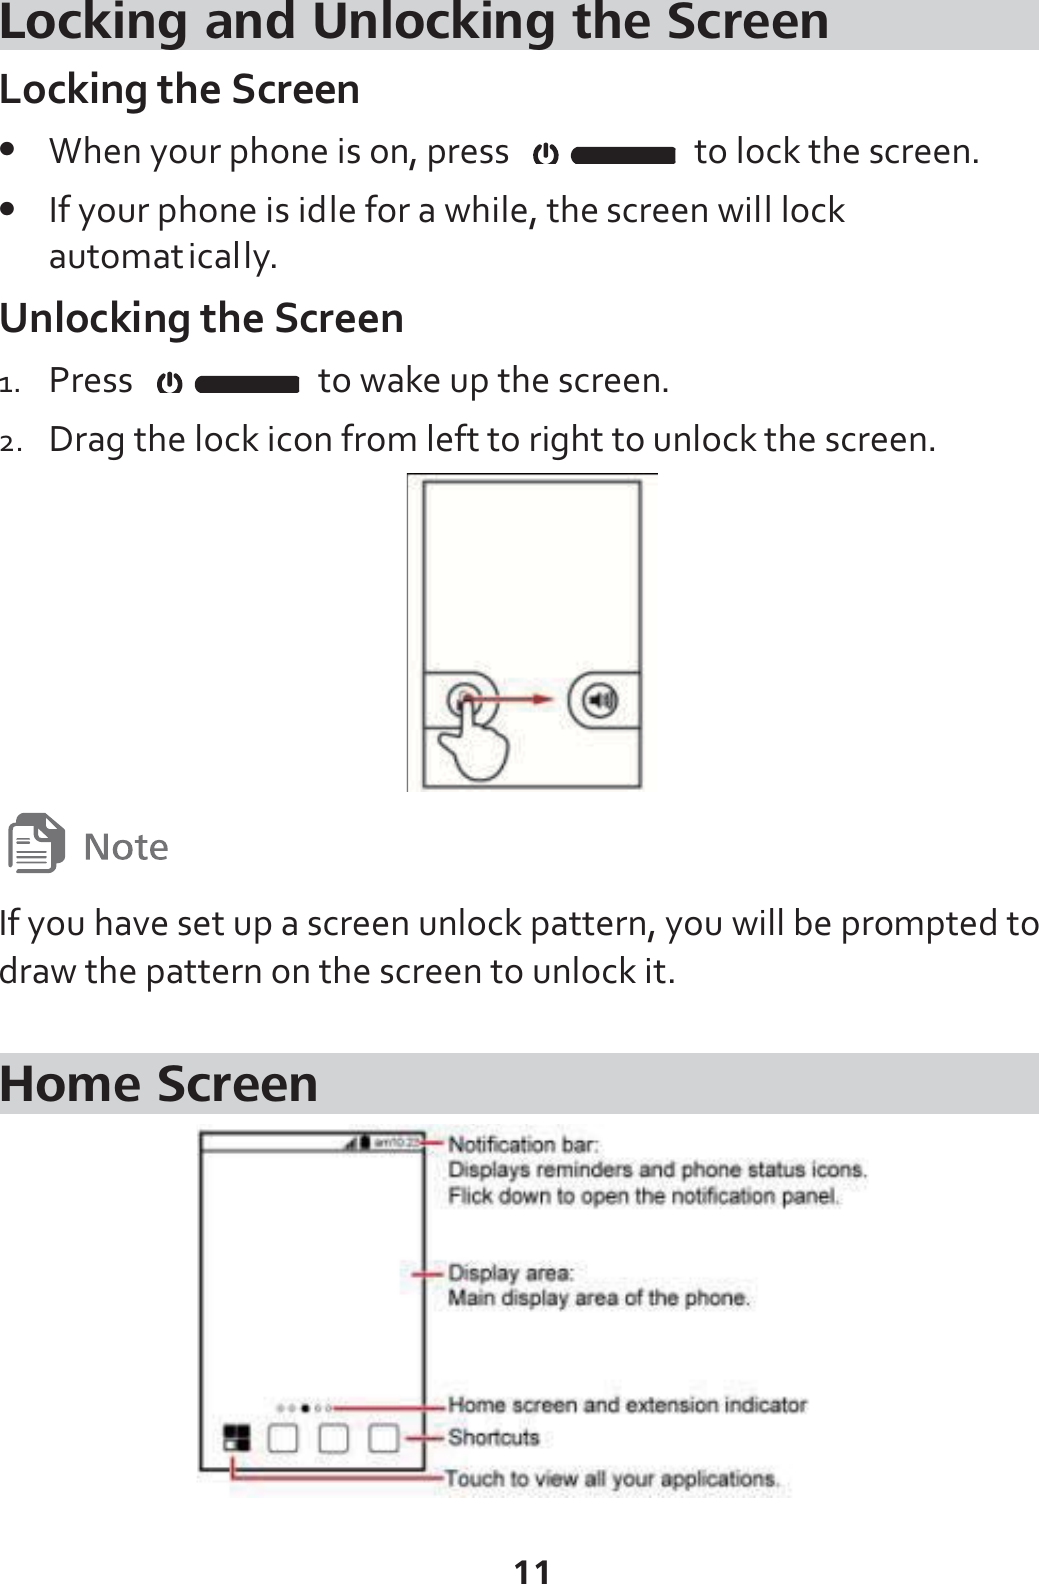 11 Locking and Unlocking the Screen Locking the Screen z When your phone is on, press    to lock the screen.   z If your phone is idle for a while, the screen will lock automatically. Unlocking the Screen 1. Press    to wake up the screen. 2. Drag the lock icon from left to right to unlock the screen.   If you have set up a screen unlock pattern, you will be prompted to draw the pattern on the screen to unlock it.  Home Screen  